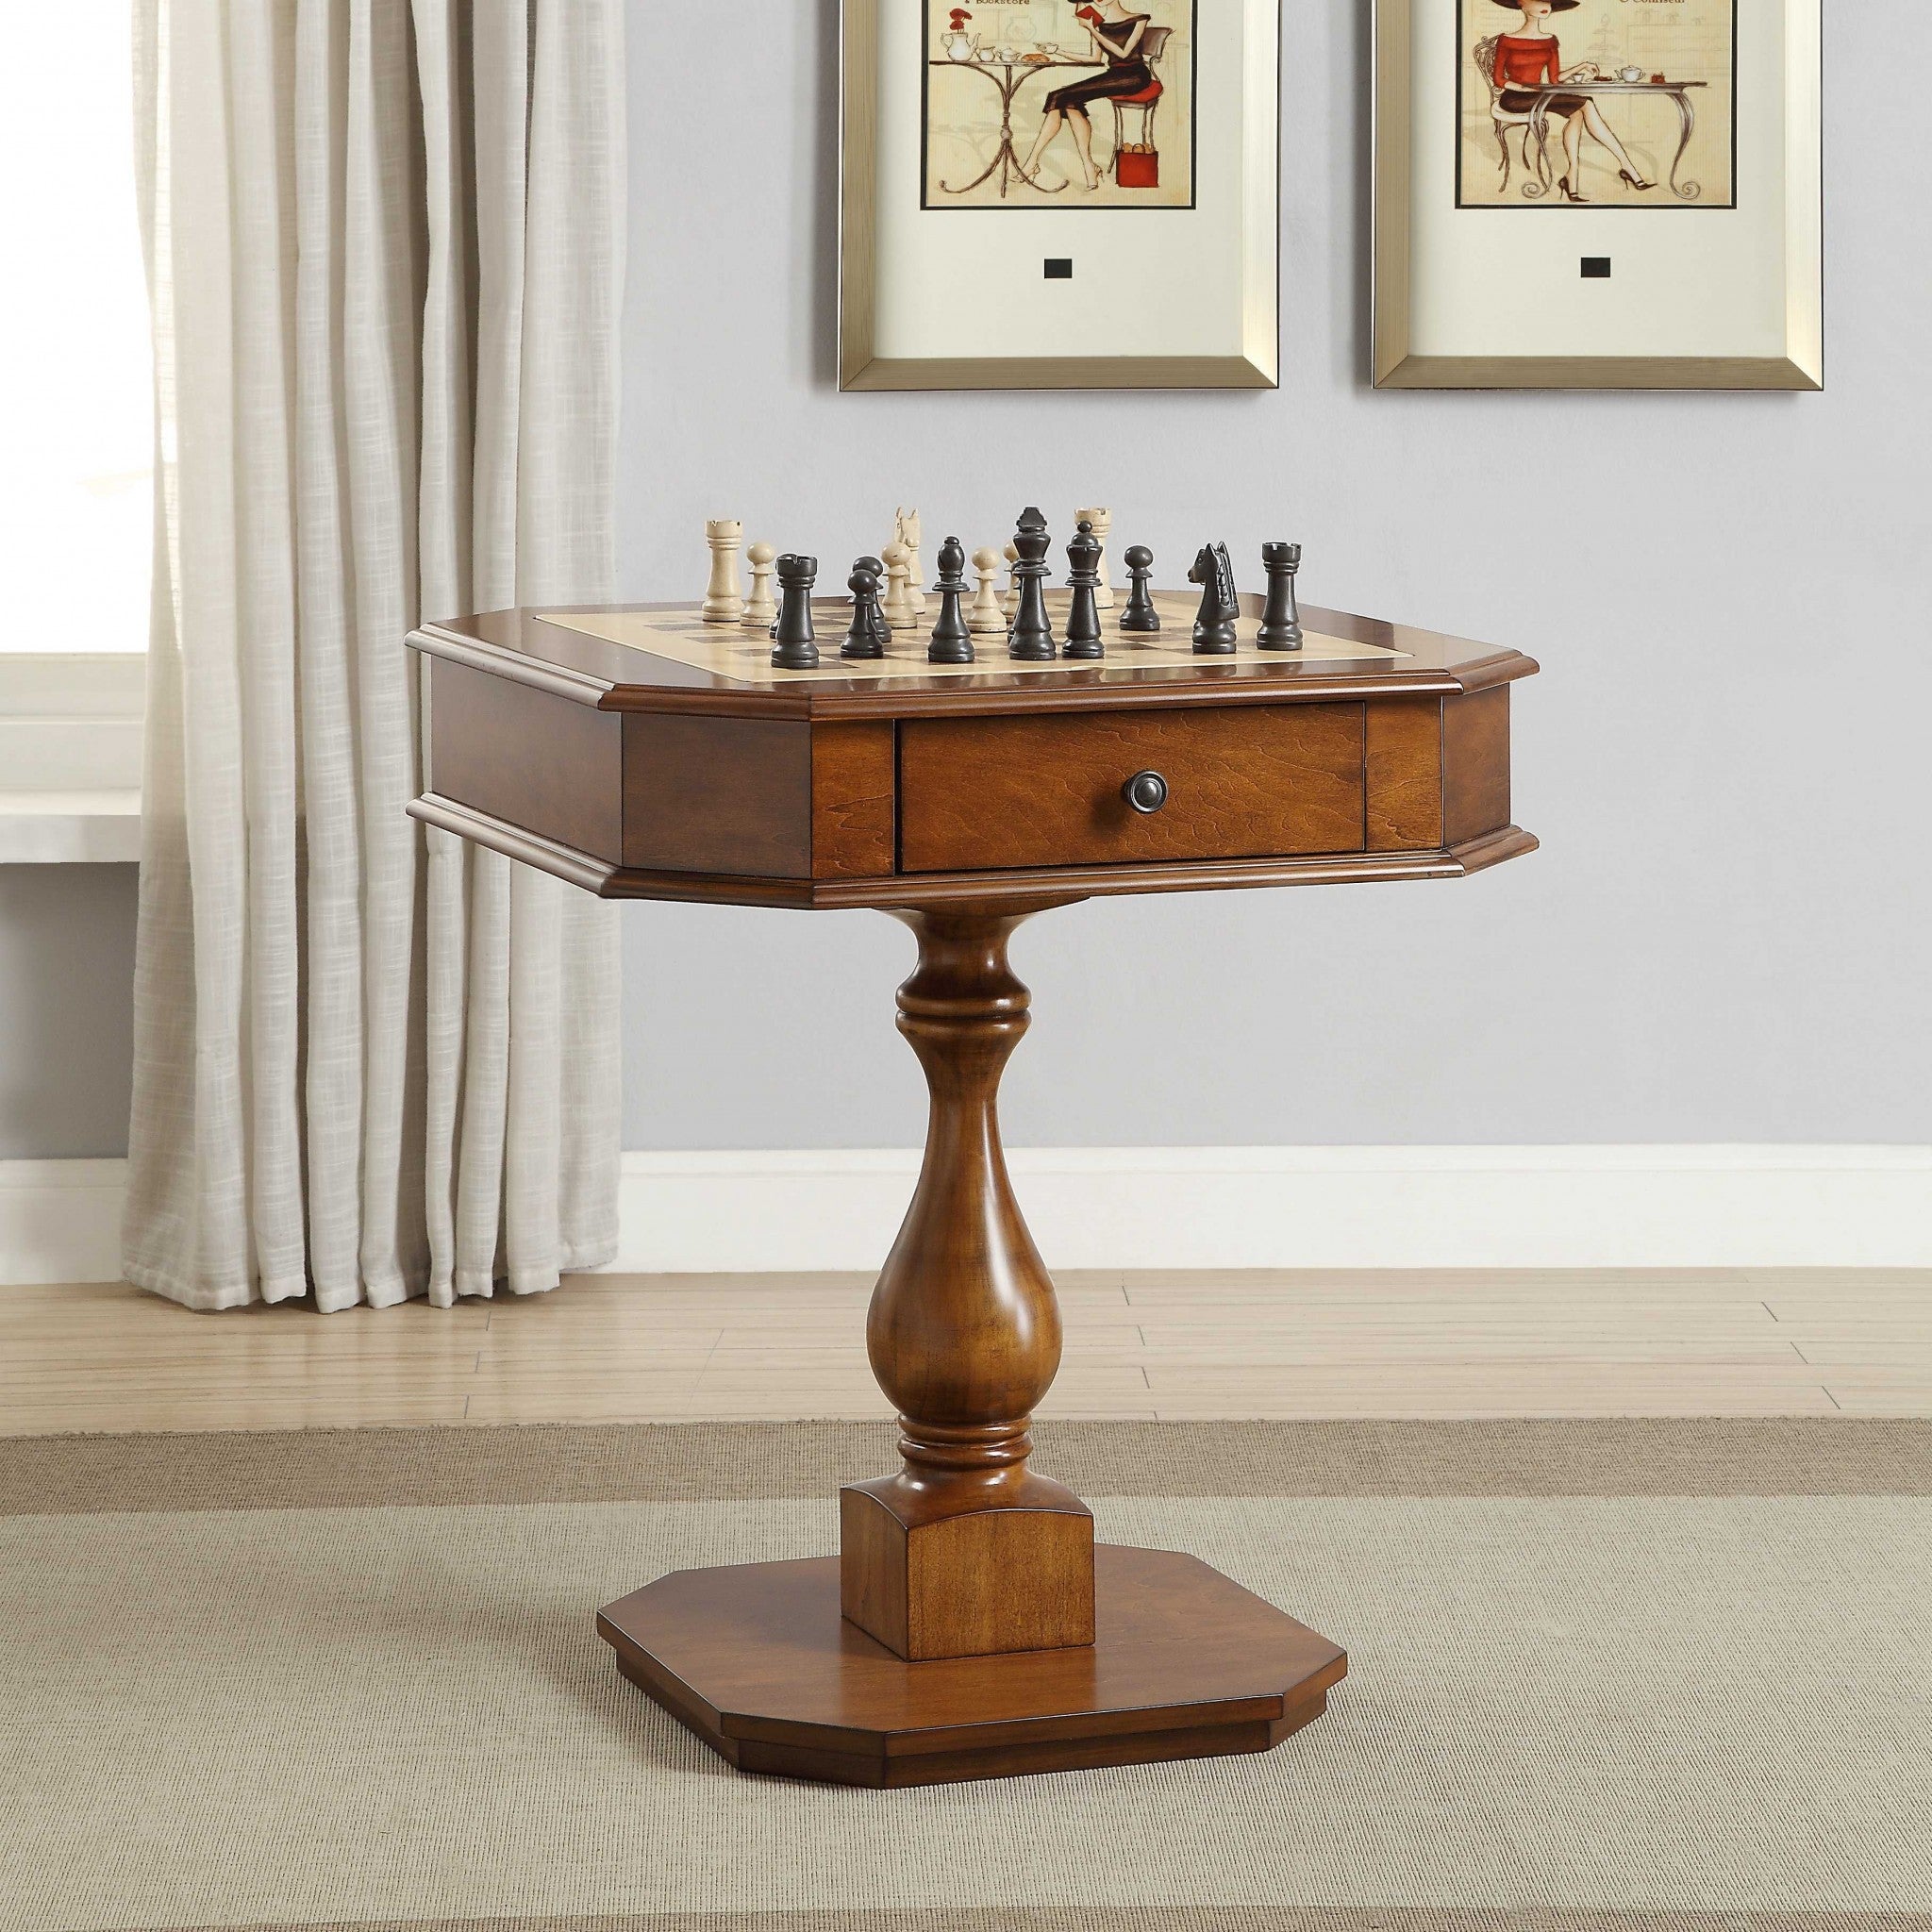 28" X 28" X 31" Cherry Mdf Game Table